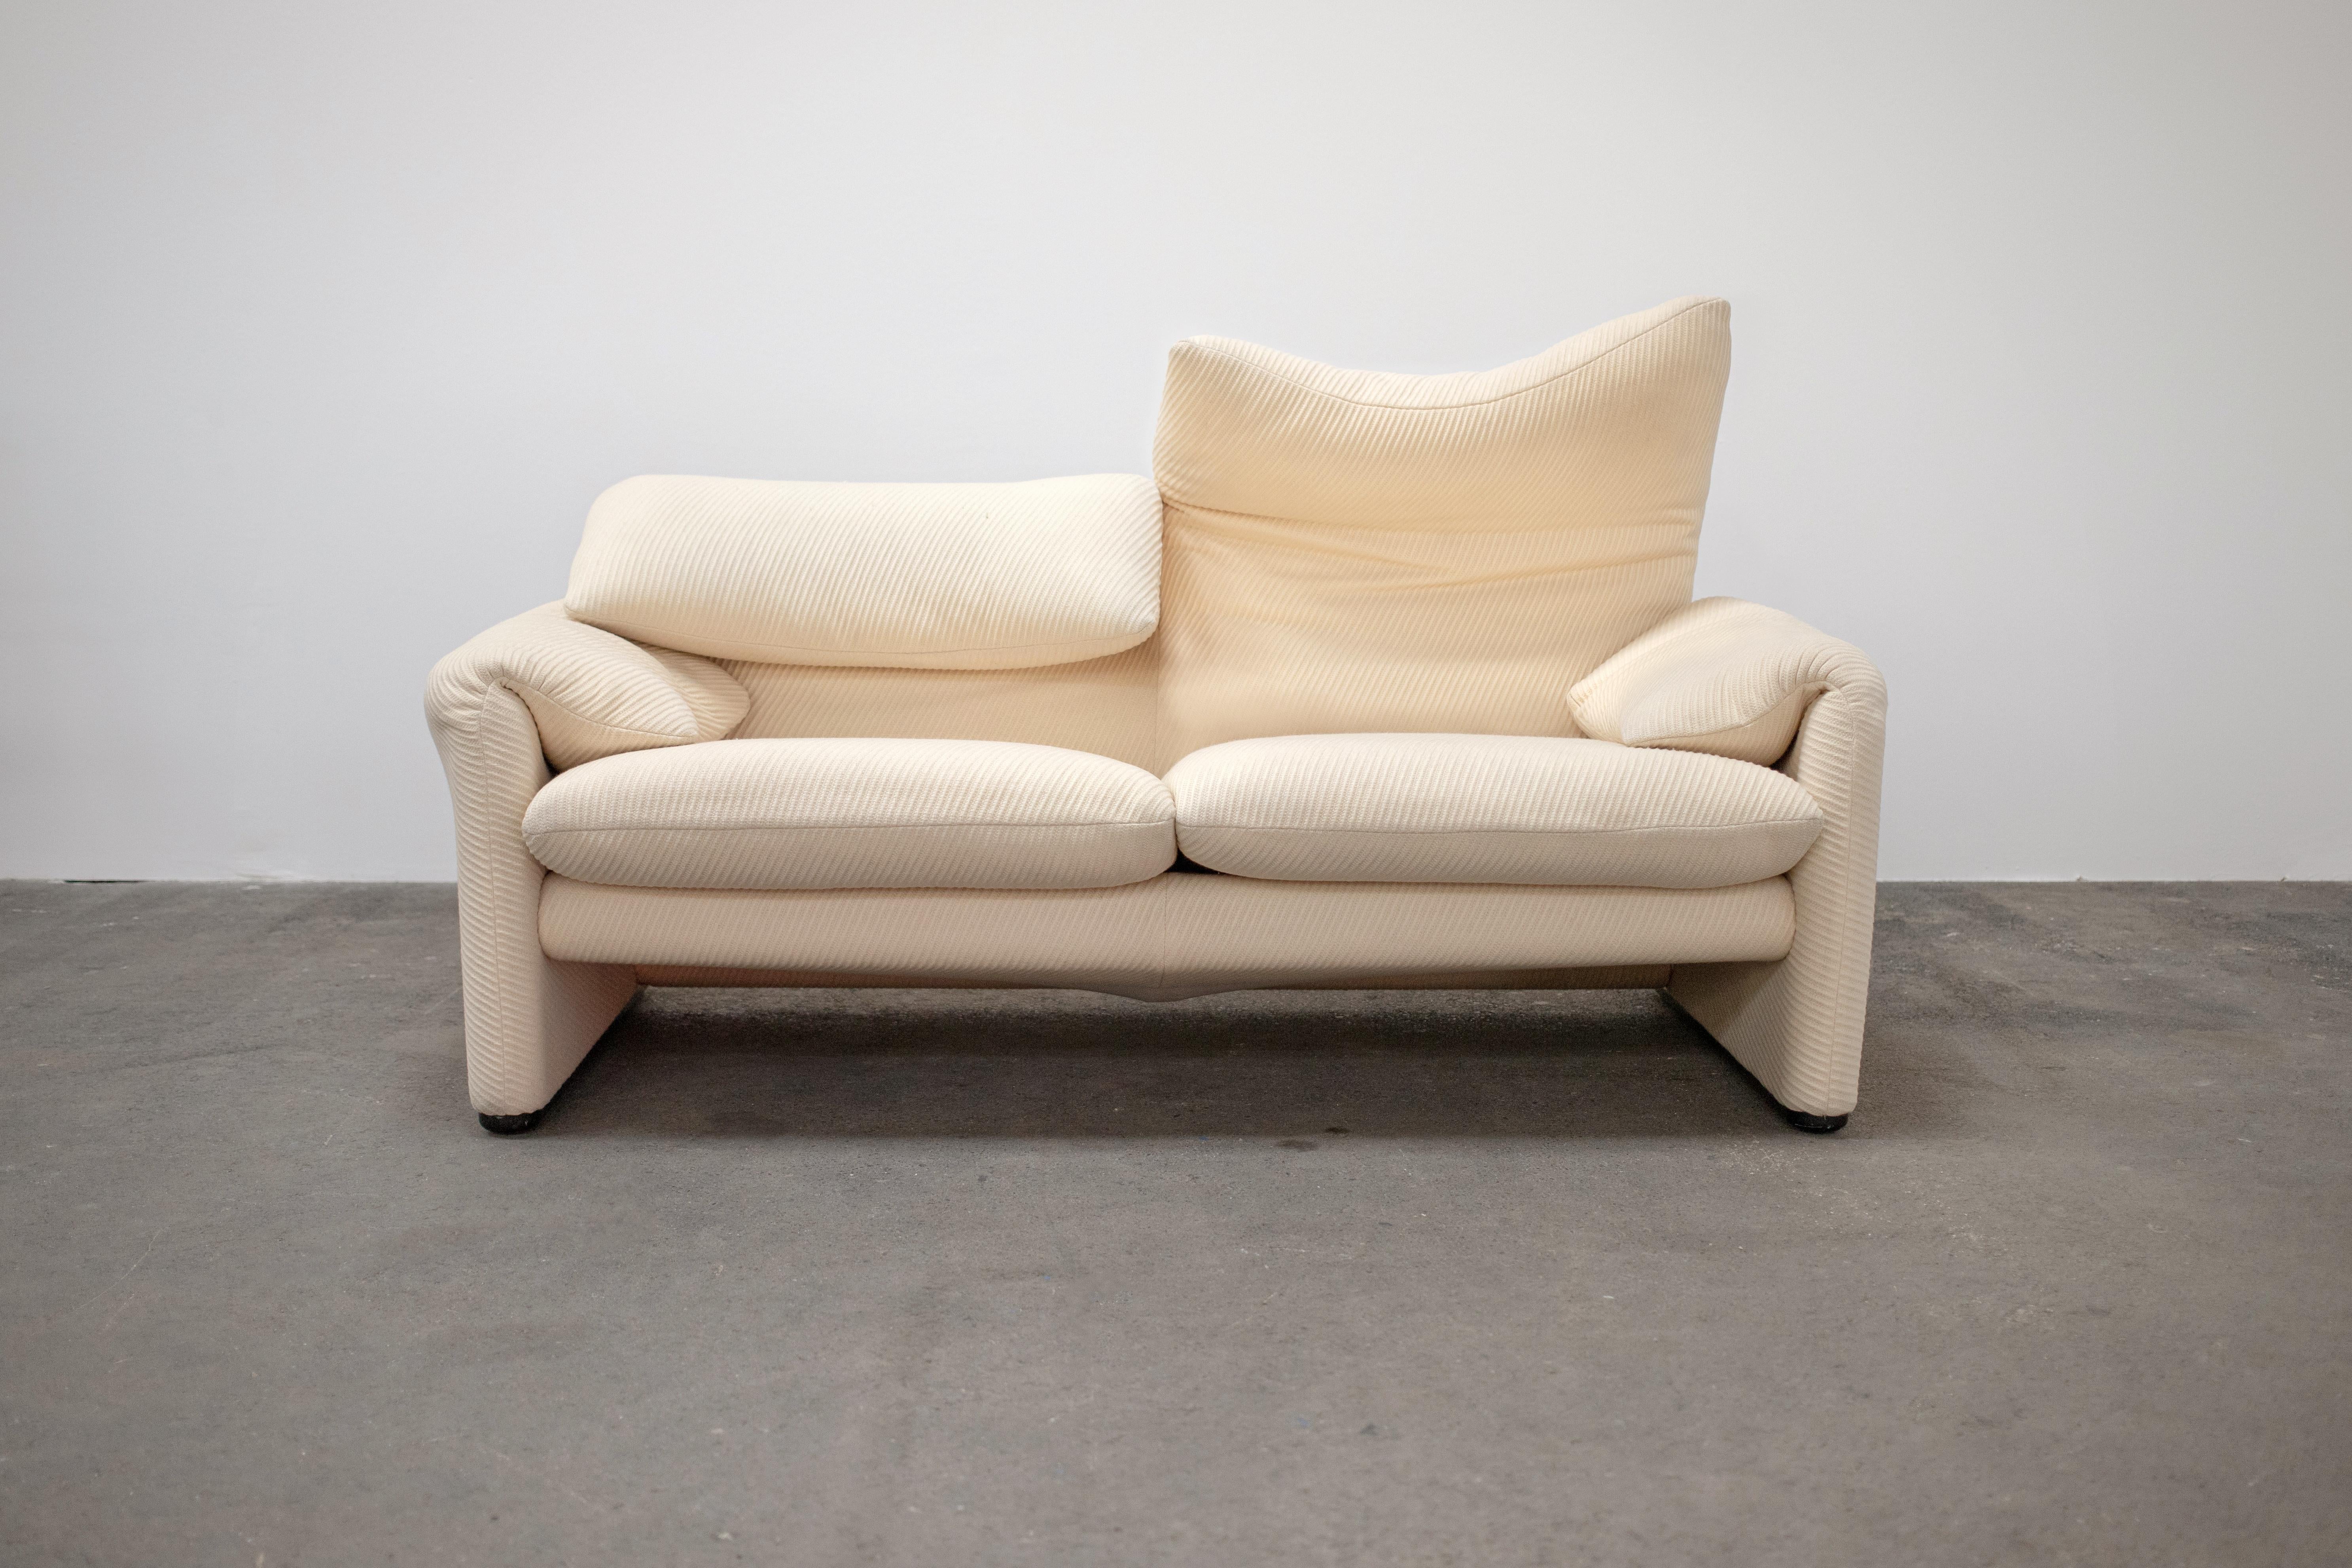 Mid-Century Modern 1970s 2-Seater Maralunga Sofa by Vico Magistretti for Cassina For Sale